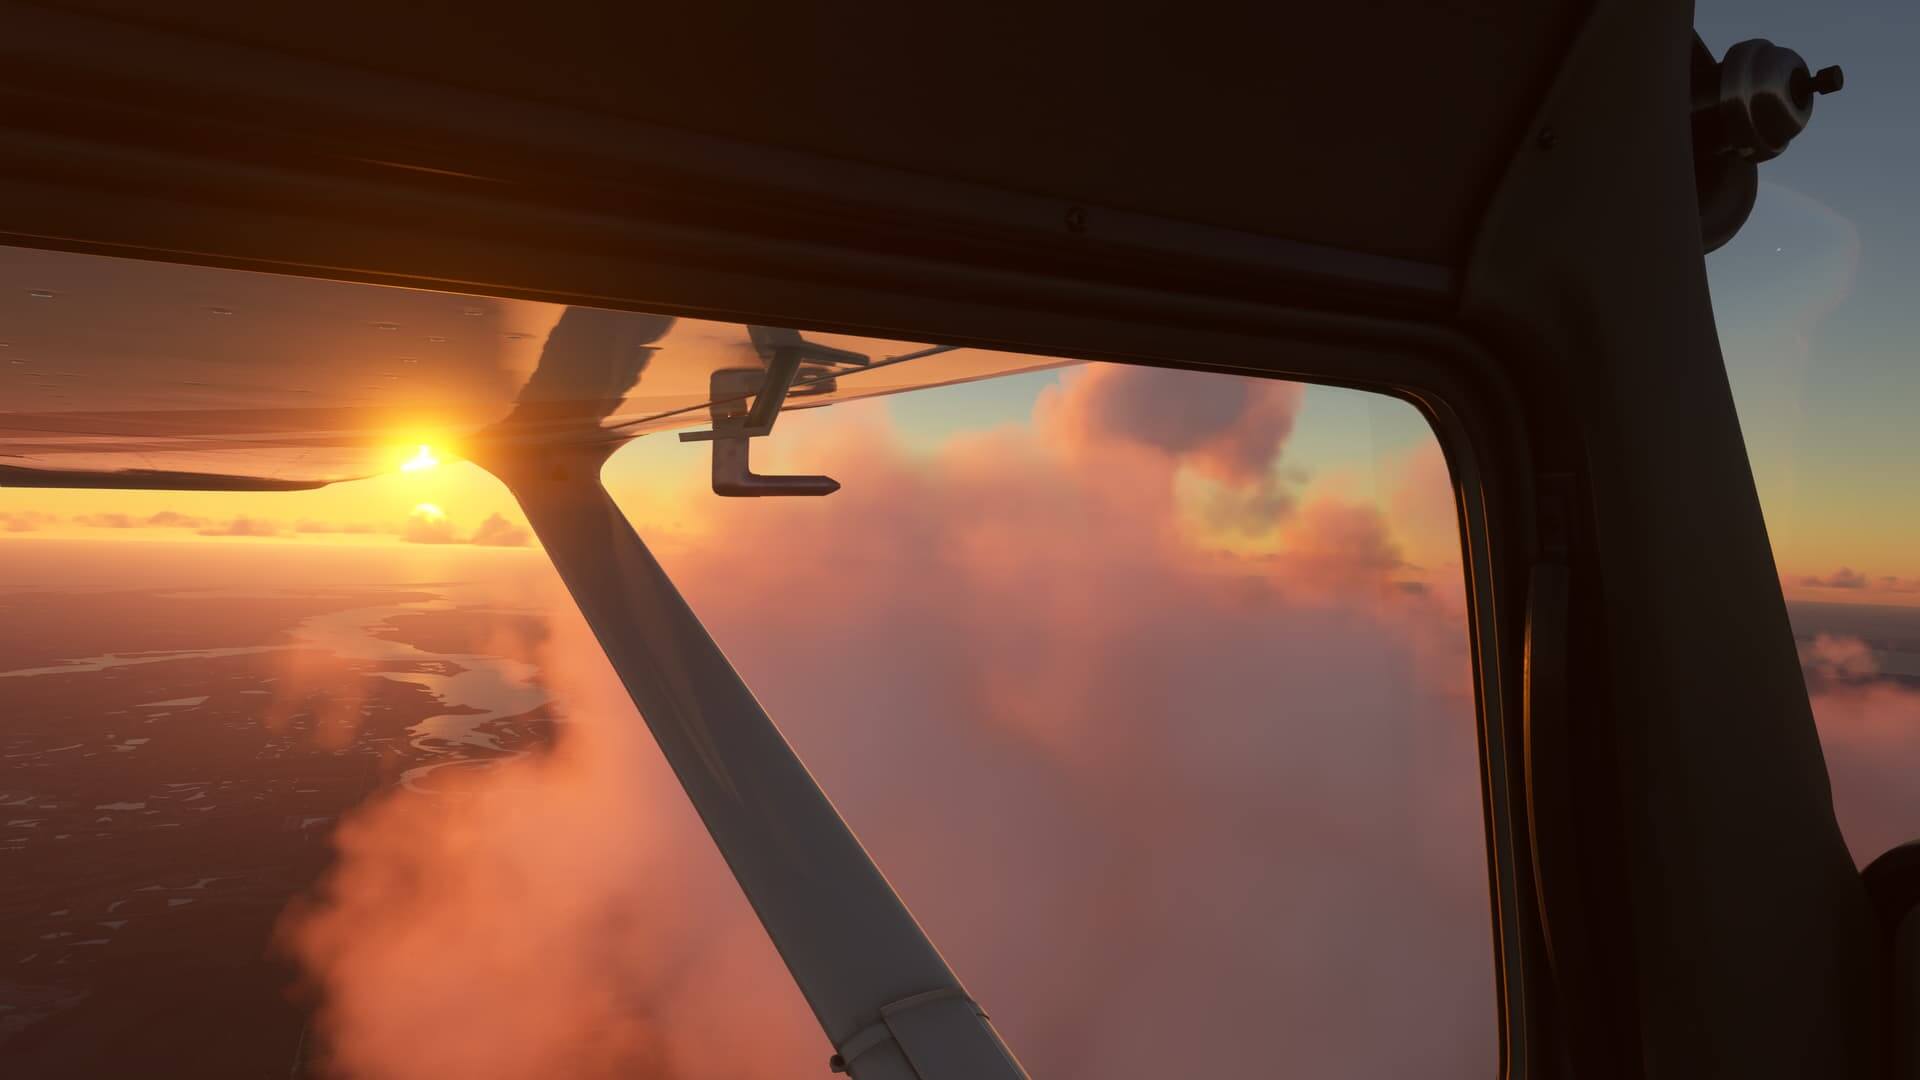 A view from the cockpit of a Cessna 172, looking out of the left window towards clouds and a sunset in the distance.